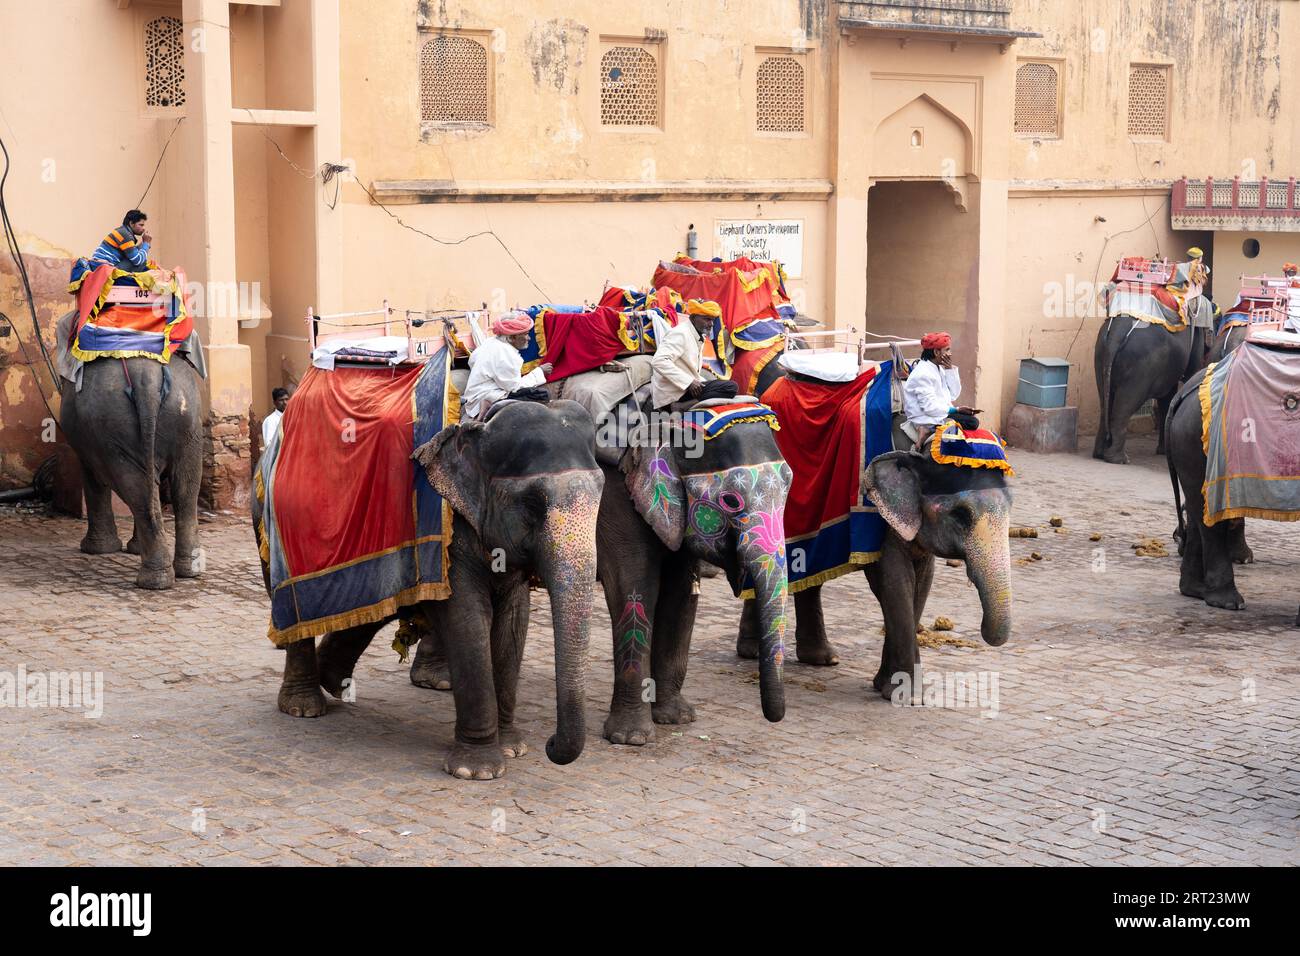 Jaipur, India, December 12, 2019: Decorated elephants waiting for tourists at Amber Fort Stock Photo